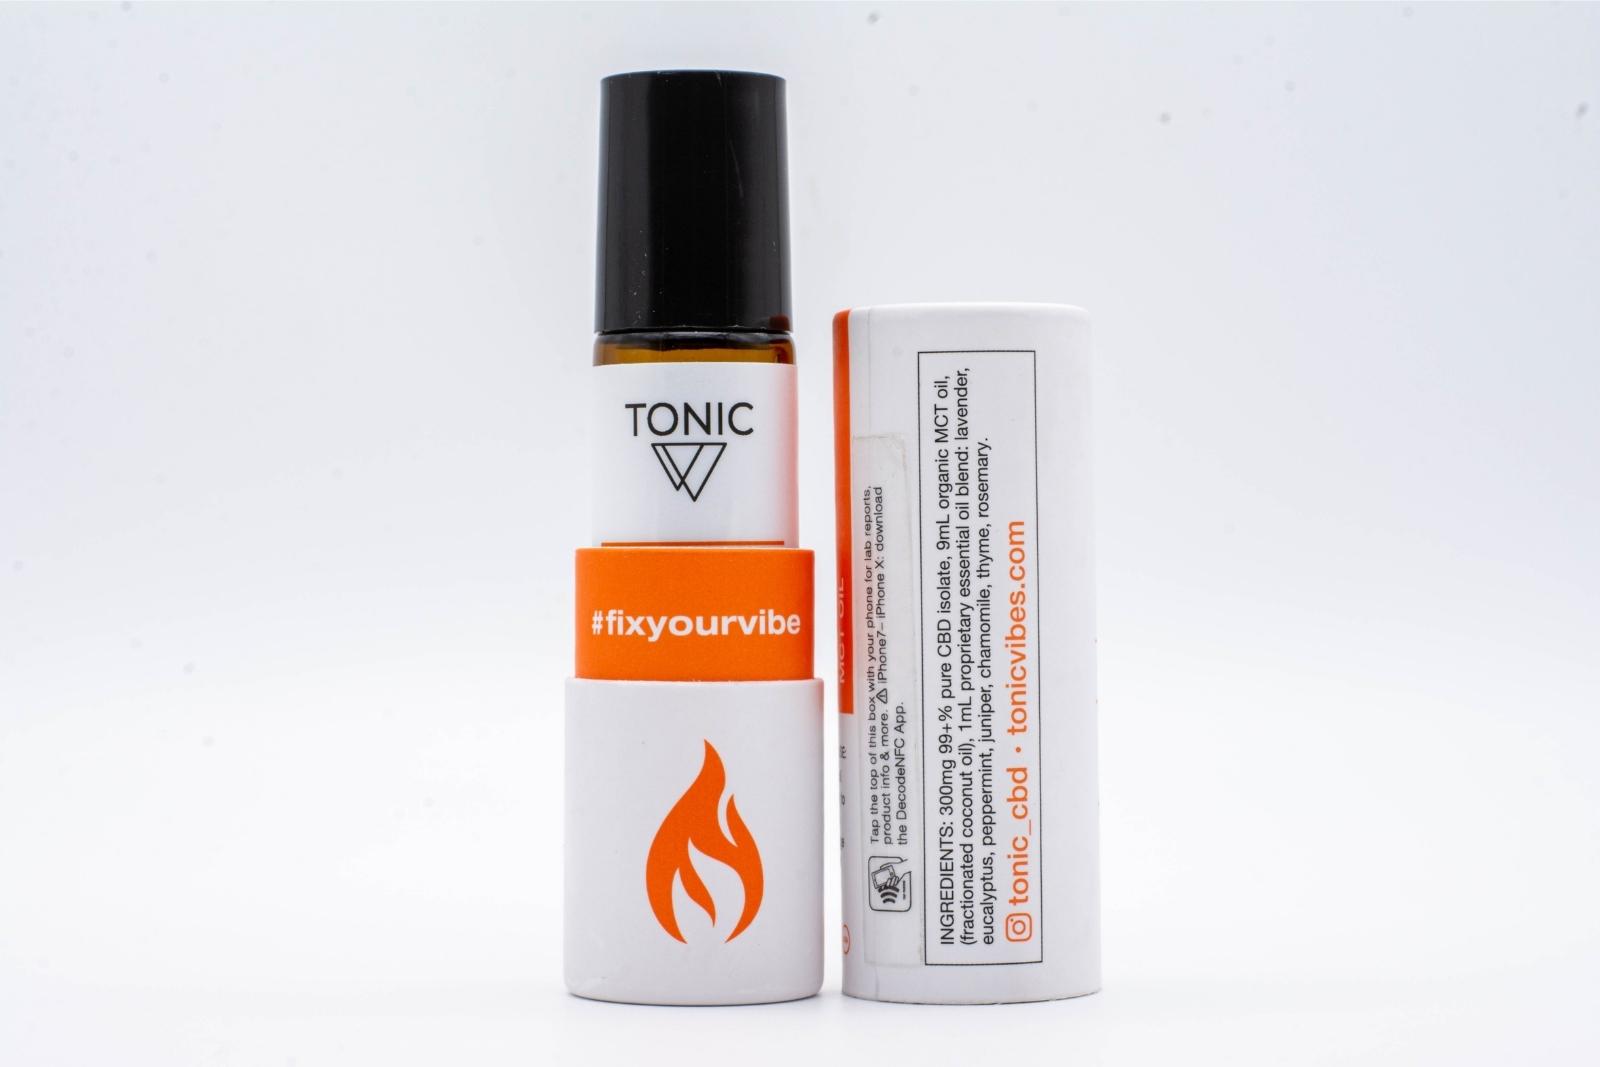 An open container of Tonic's Chronic CBD + Essential oil roll-on, showing the bottle and the ingredients, on a white background